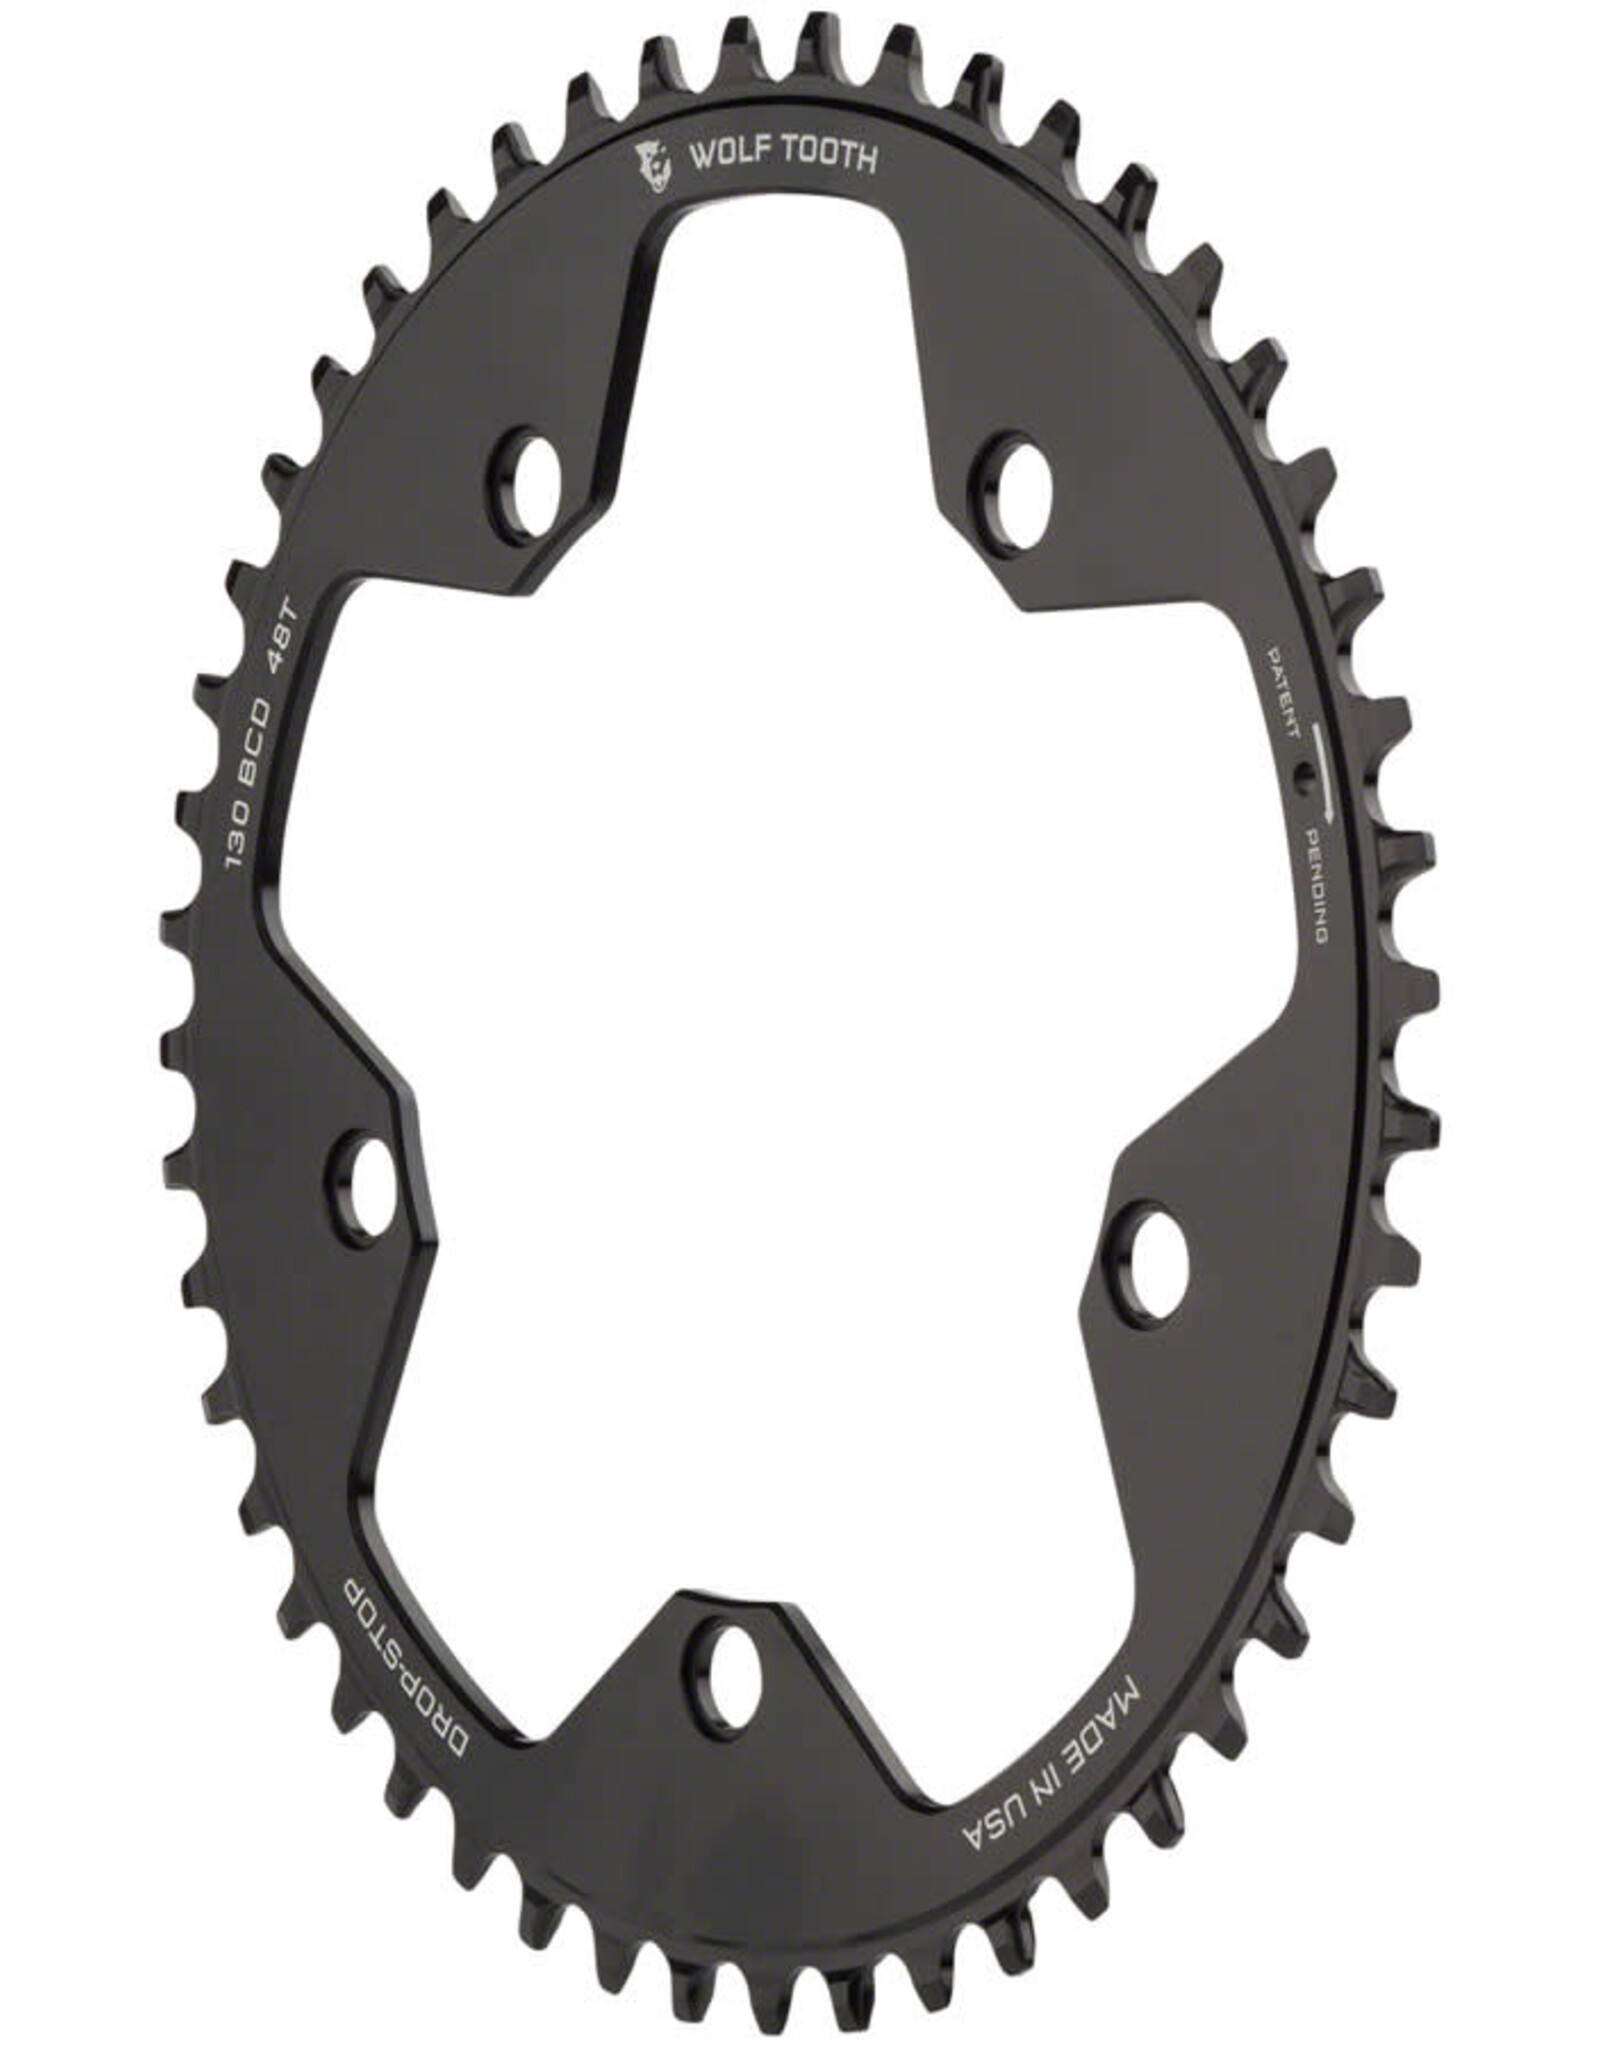 Wolf Tooth Components Wolf Tooth Drop-Stop Chainring 130 BCD 5-Bolt 10/11/12 Speed Black